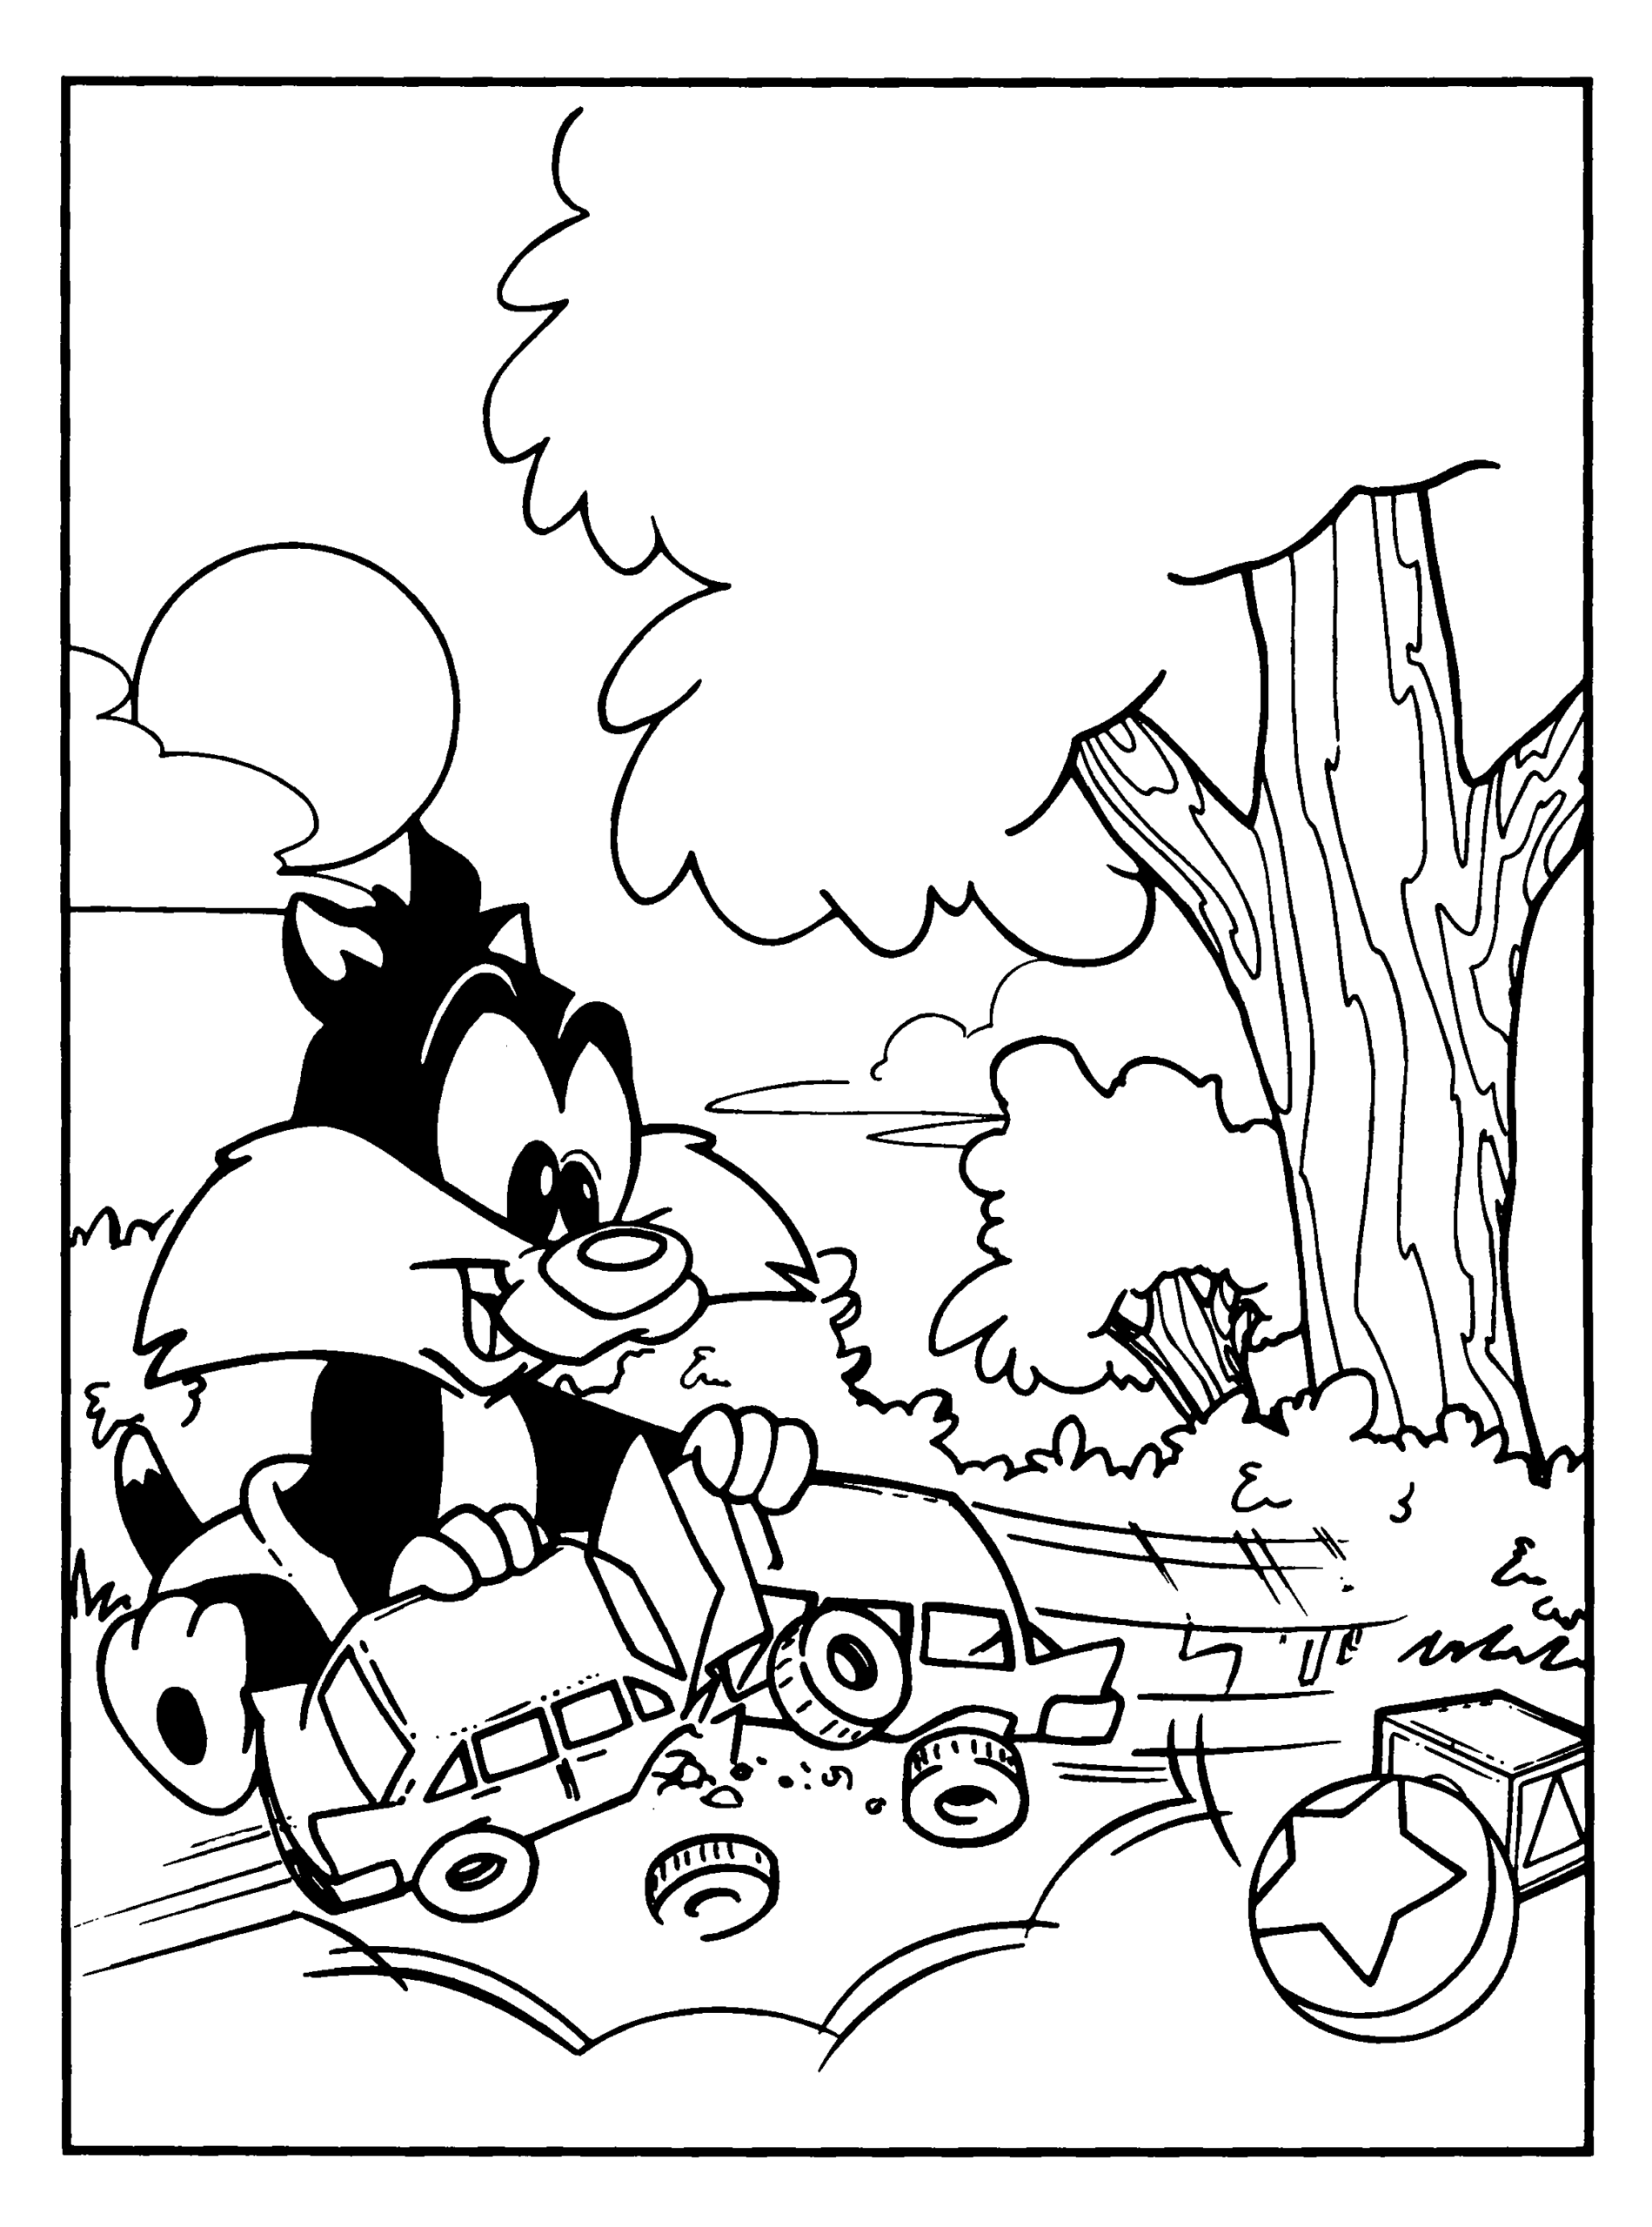 Looney Tunes Coloring Pages TV Film looney tunes 23 Printable 2020 04590 Coloring4free